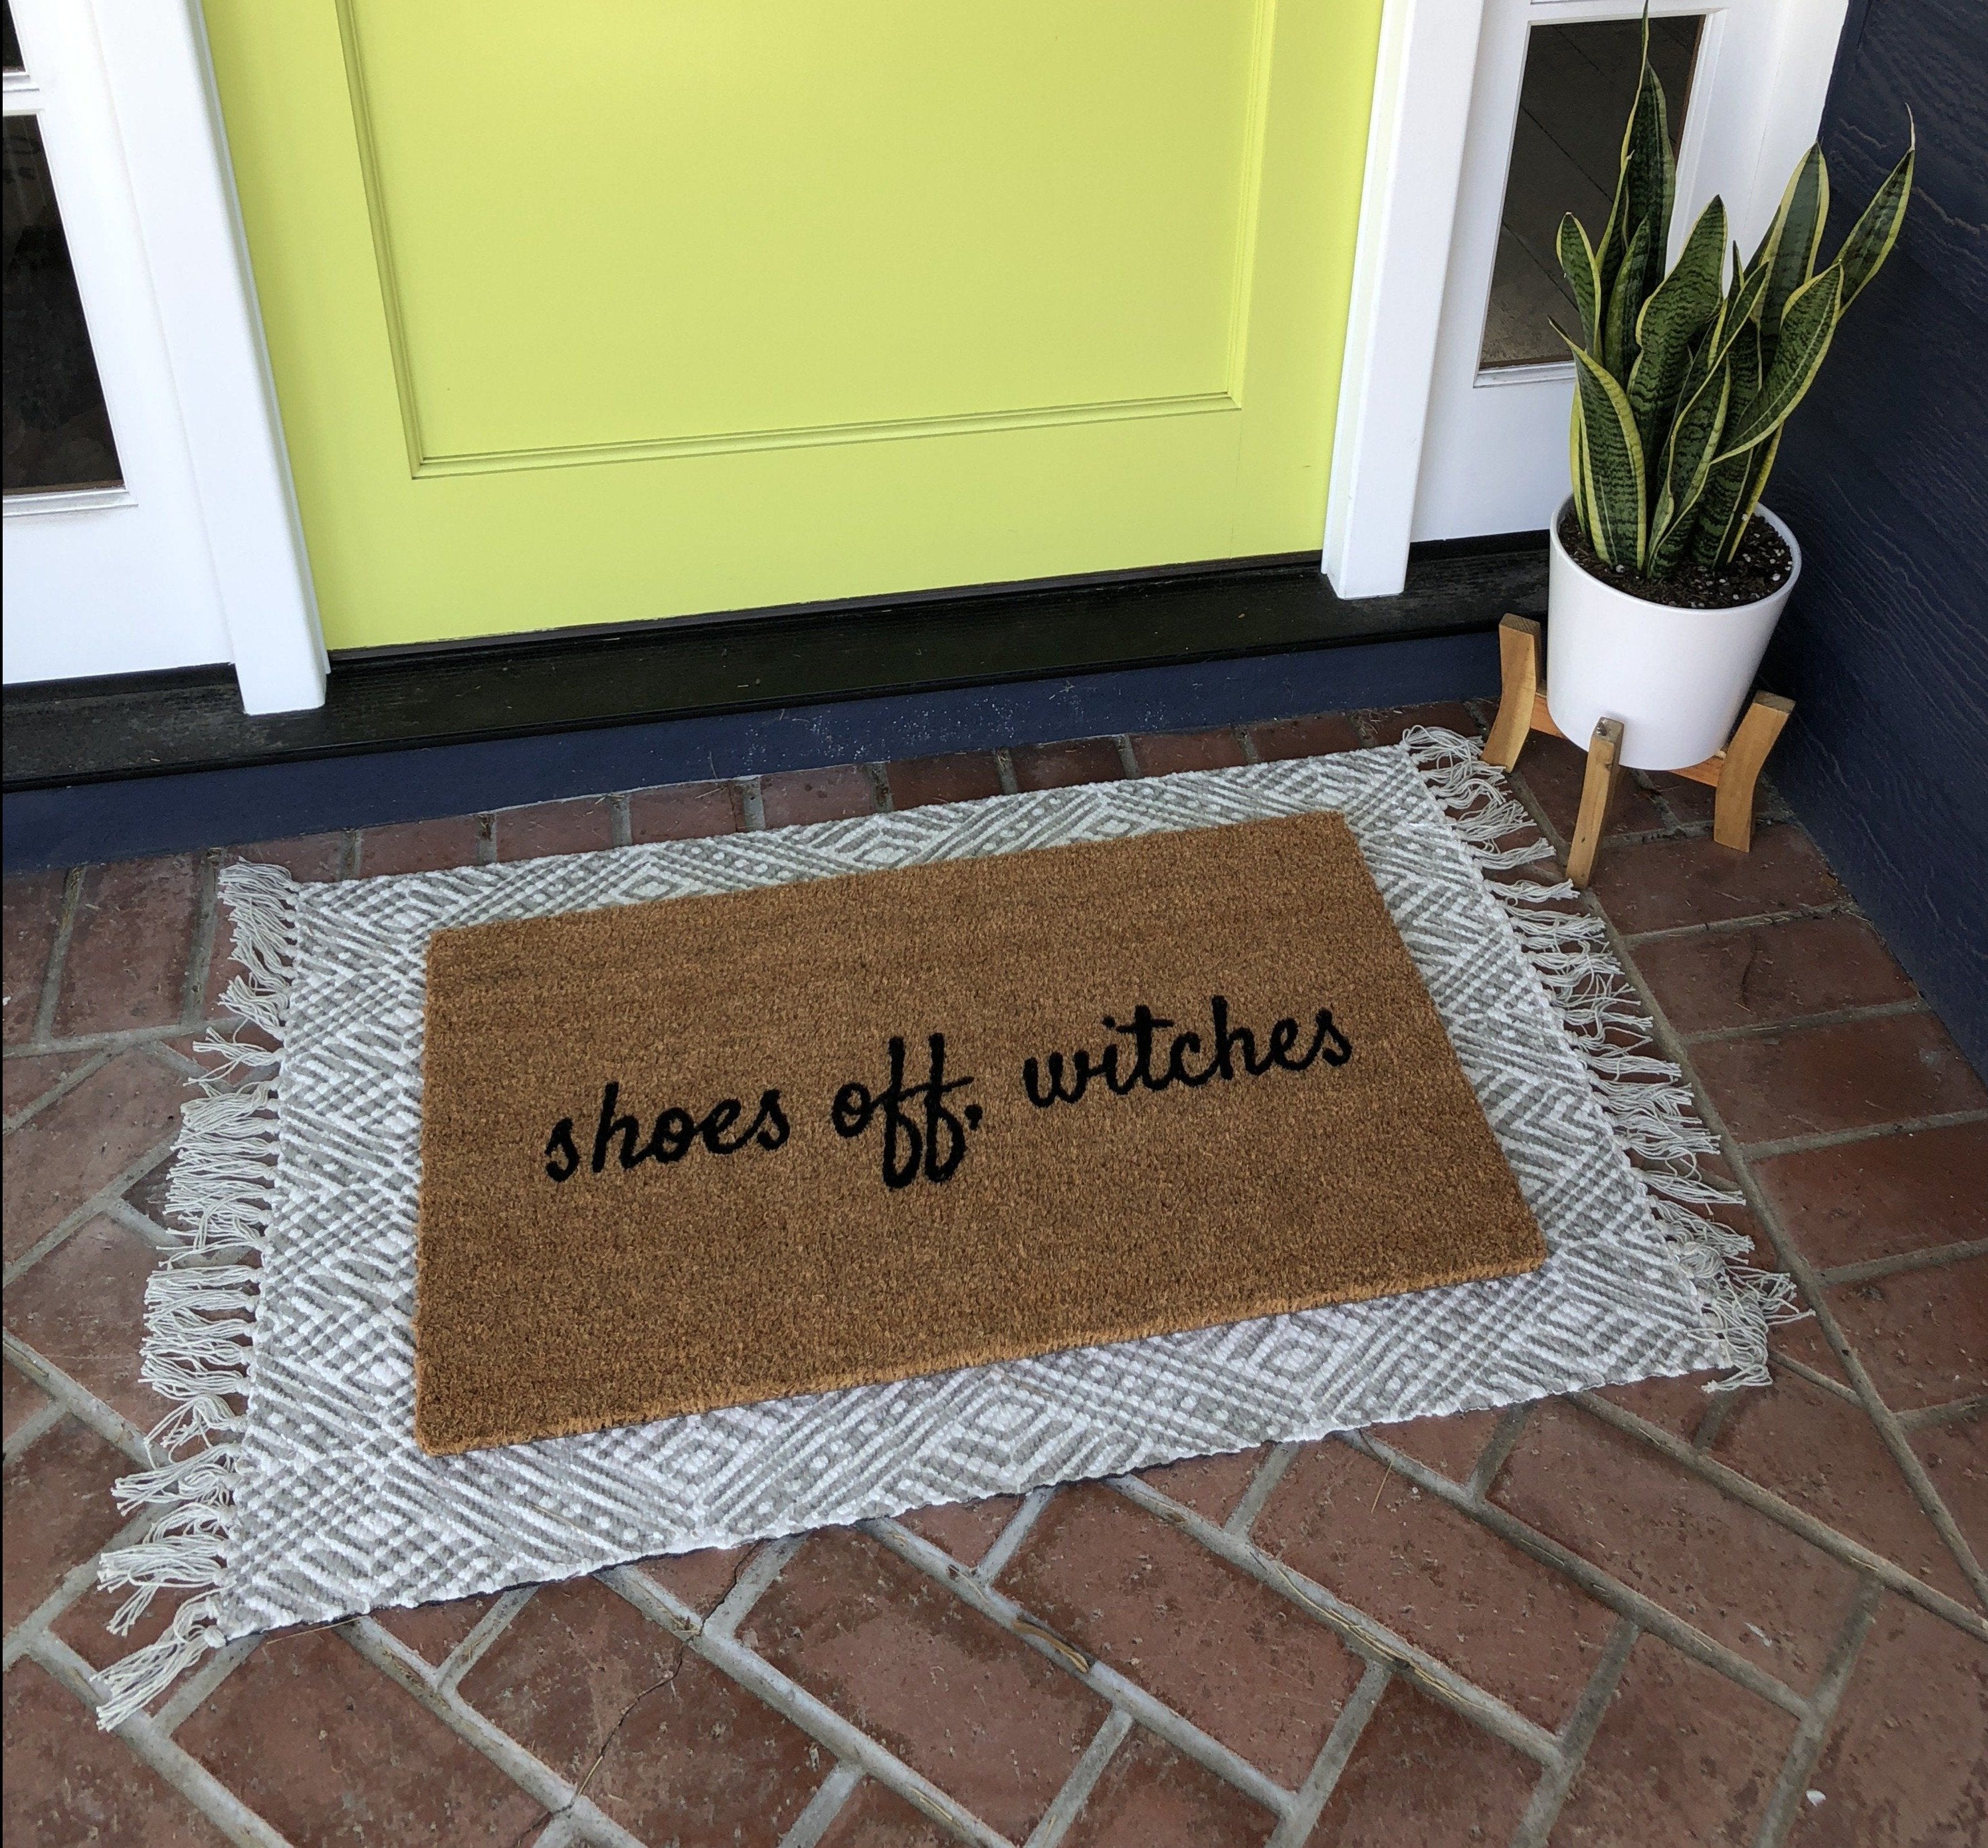 shoes off witches Funny Halloween Doormat